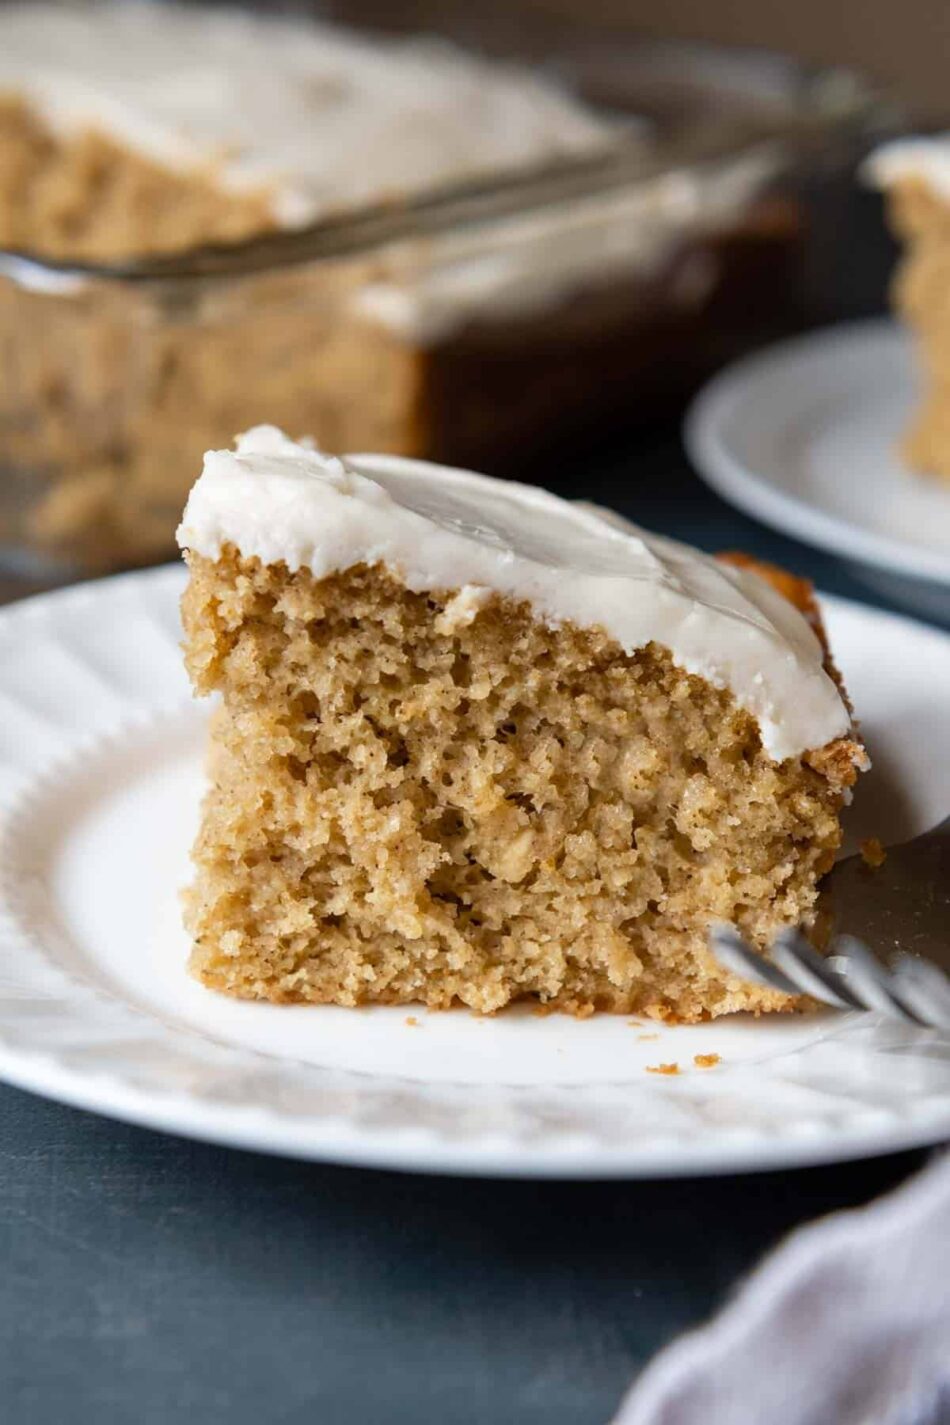 Fluffiest Oat Flour Cake (Made in 5 Minutes!)